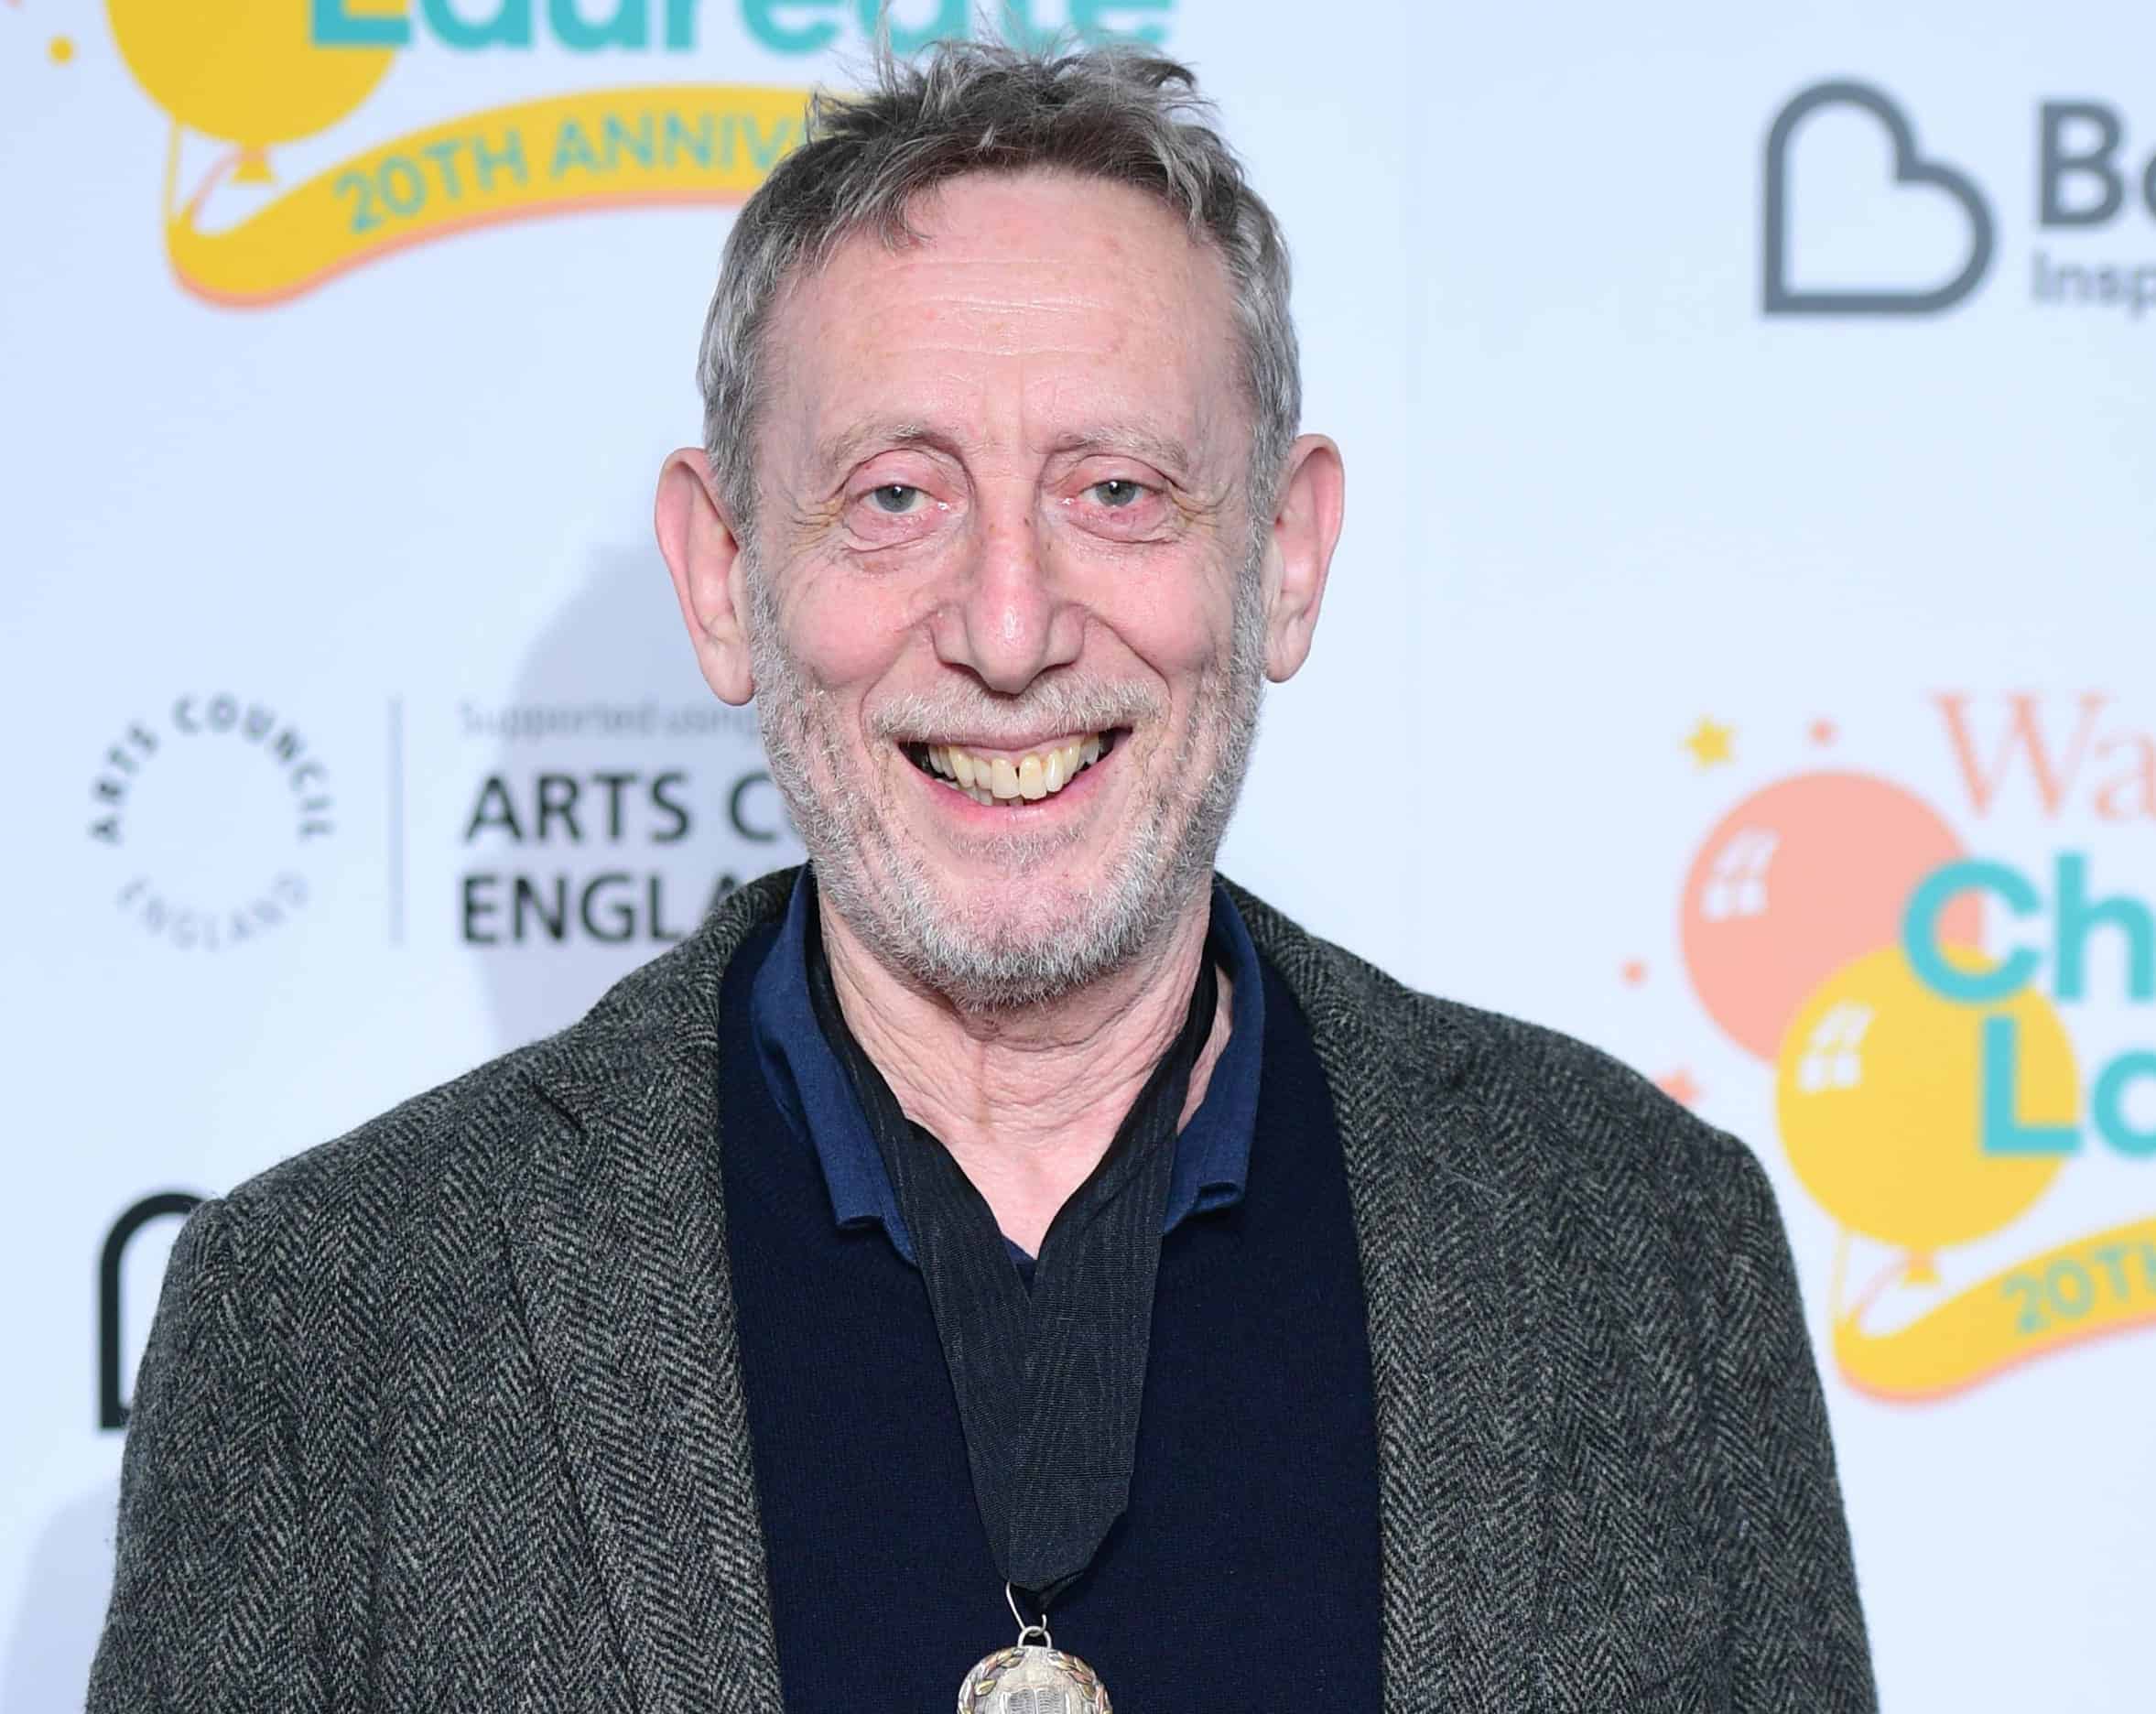 Watch: Michael Rosen emotional as he meets nurse who cared for him during Covid coma